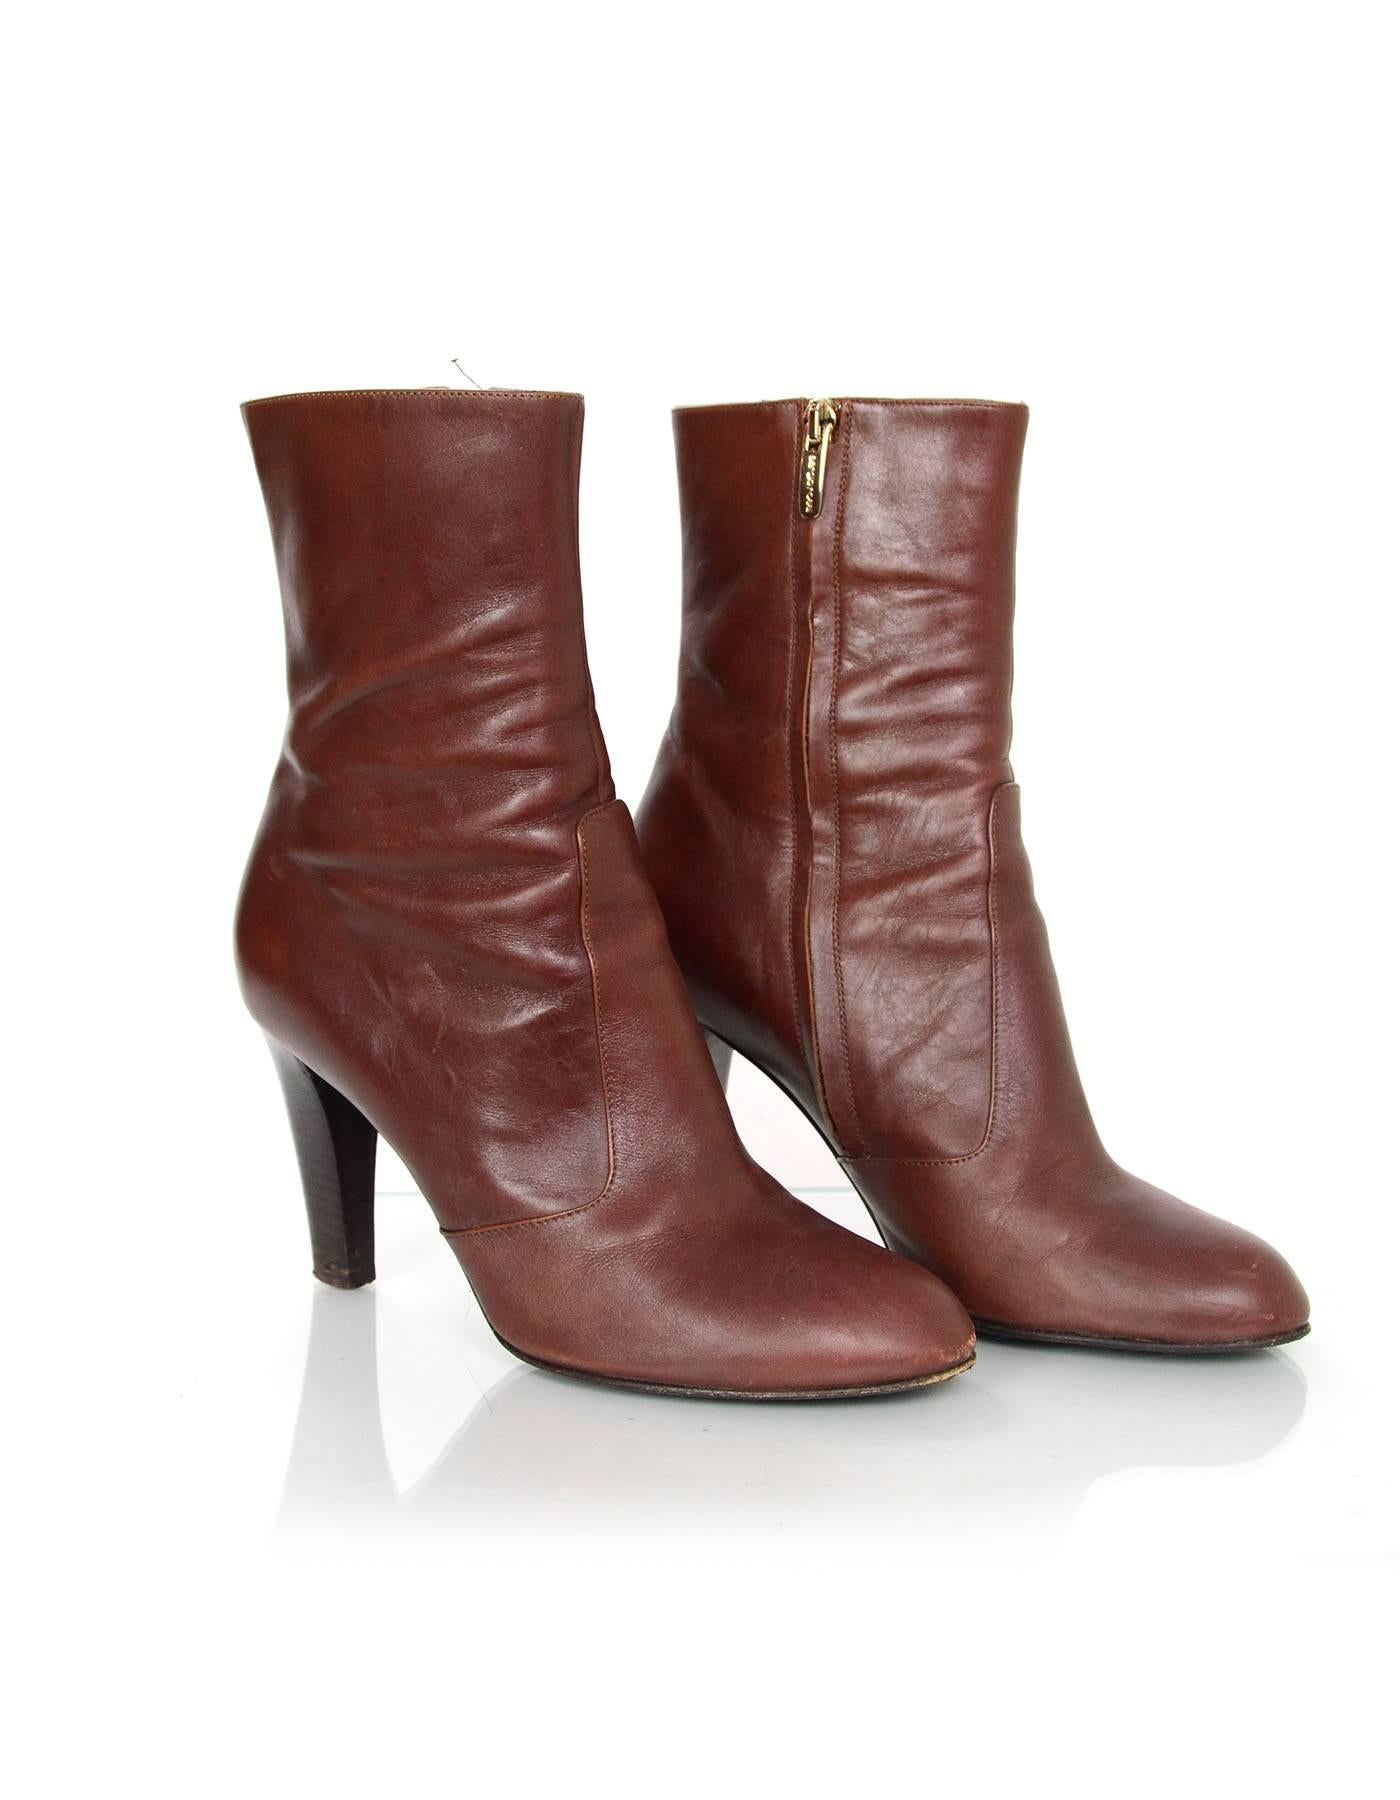 Sergio Rossi Brown Leather Ankle Boots sz 37.5 rt. $675 1